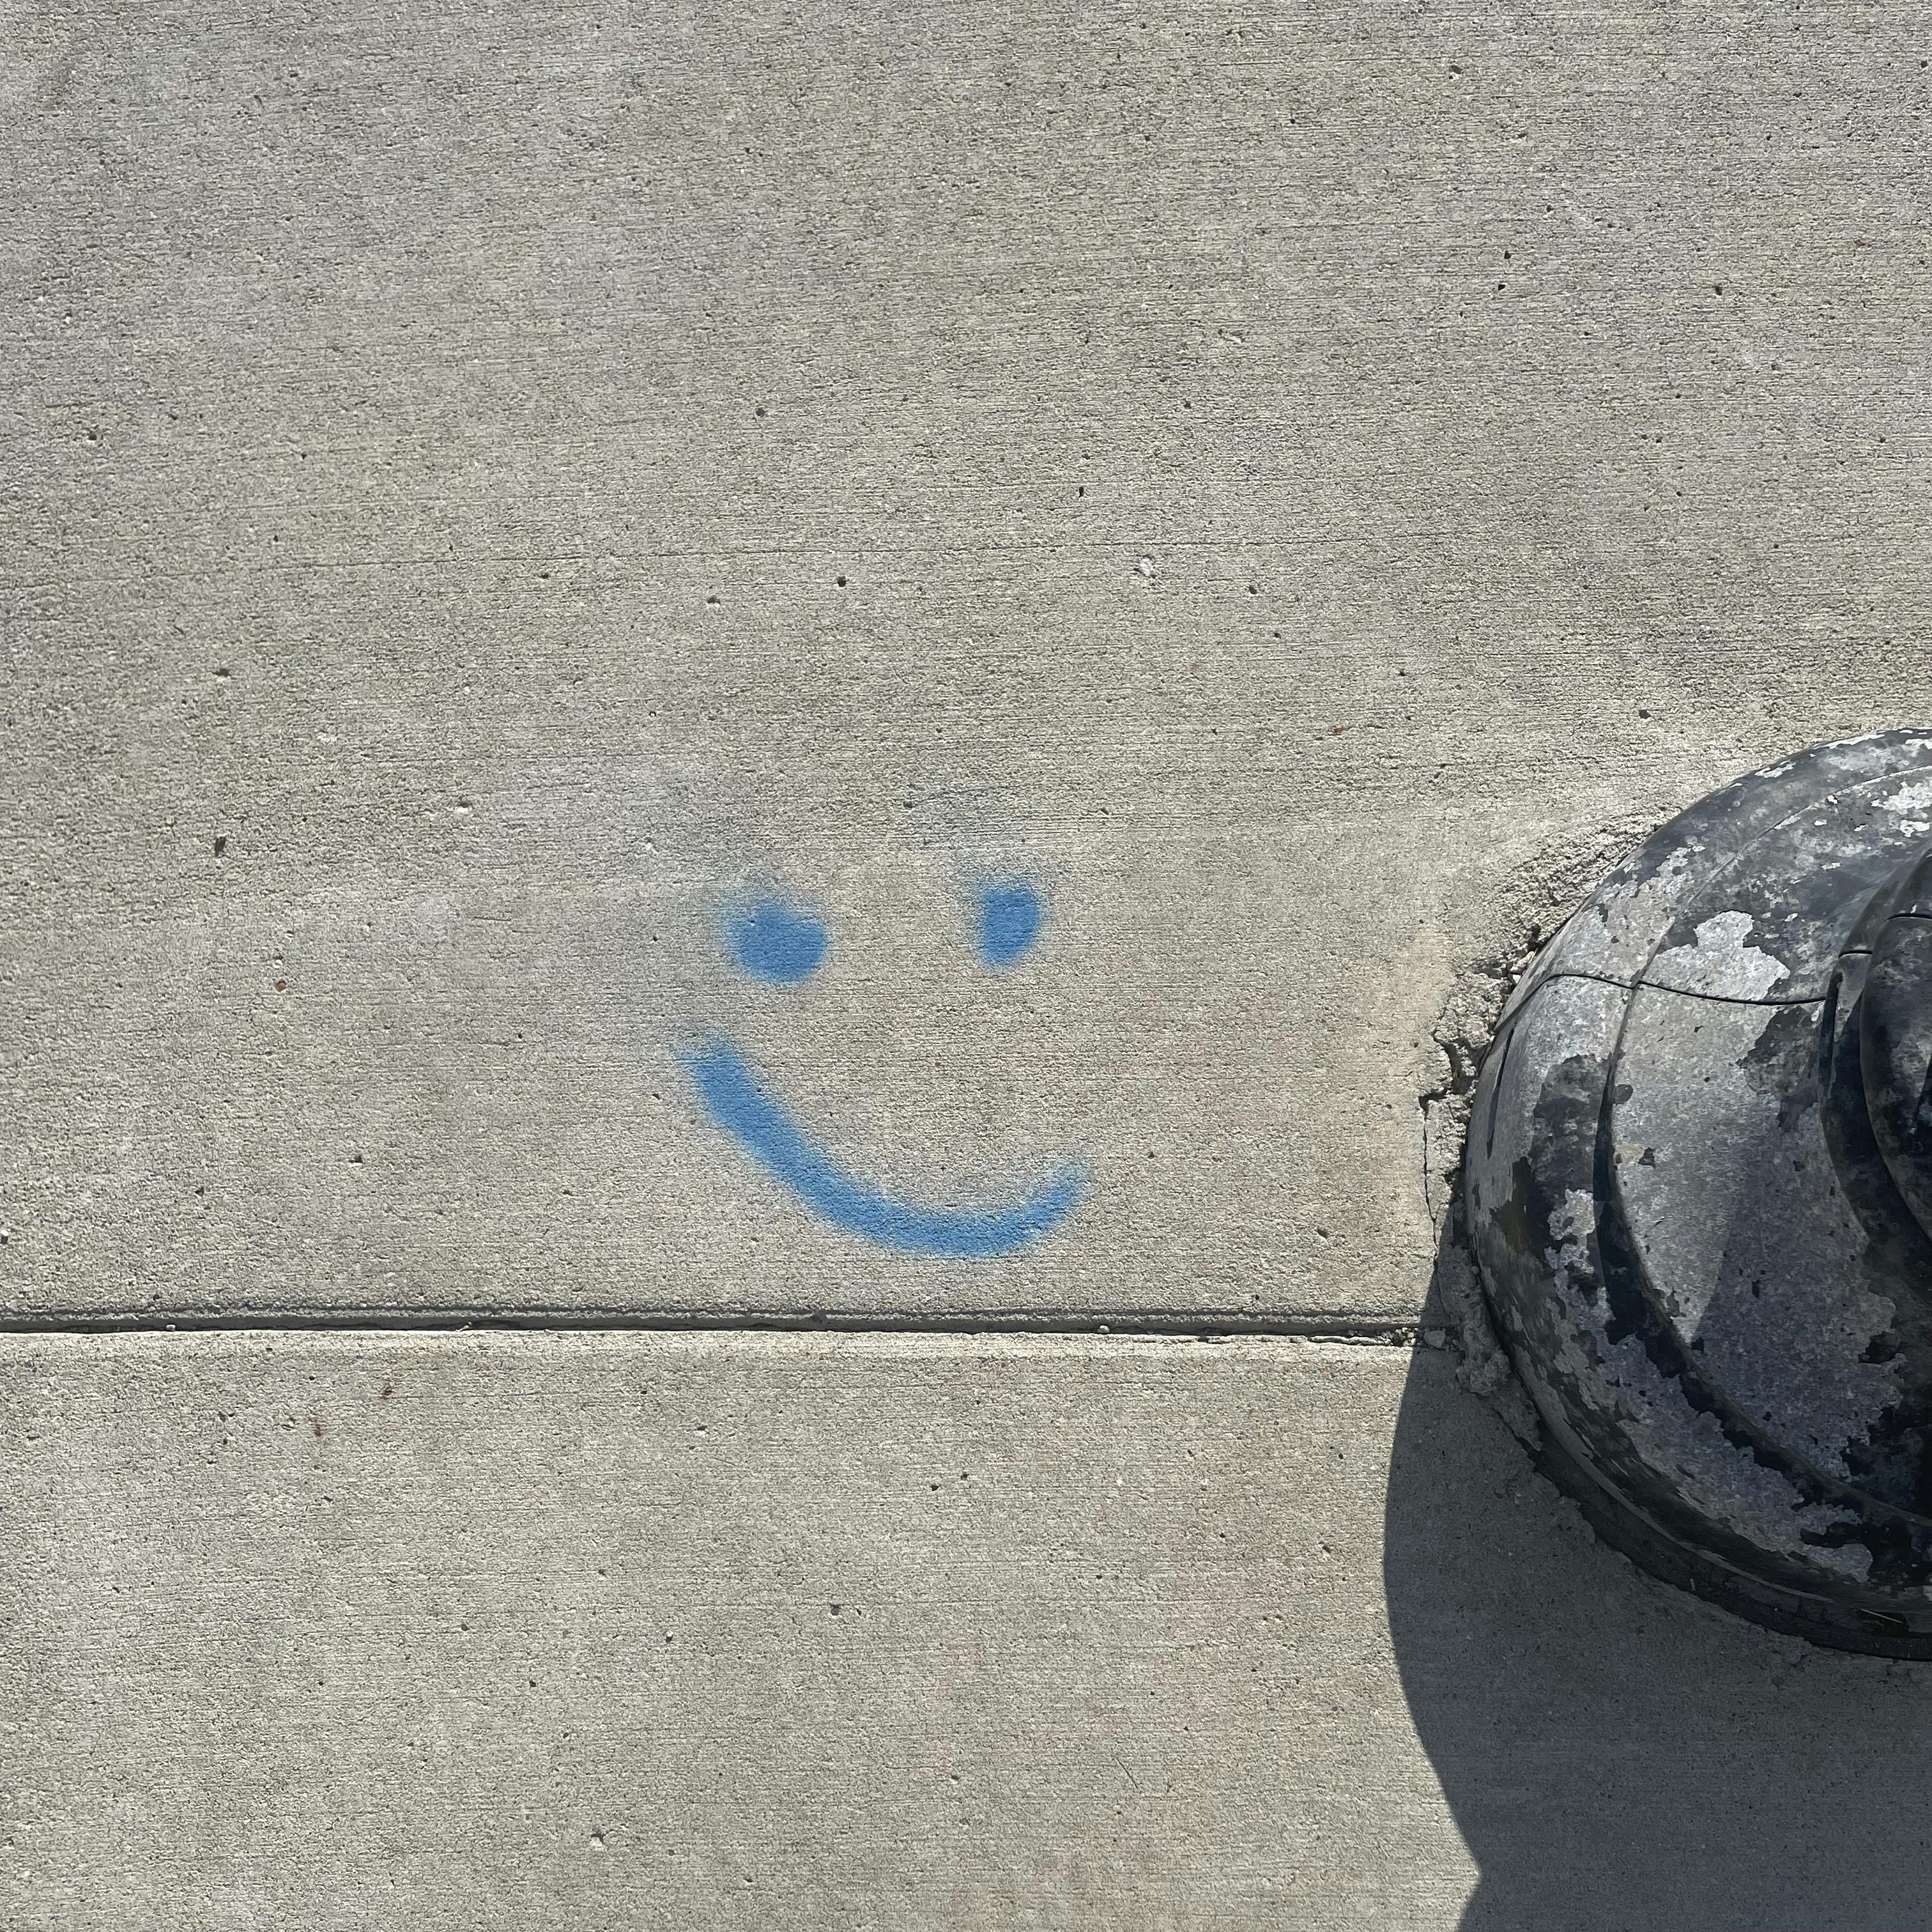 Aerial view of a blue smiley face with a crooked grin, spray painted on a sidewalk